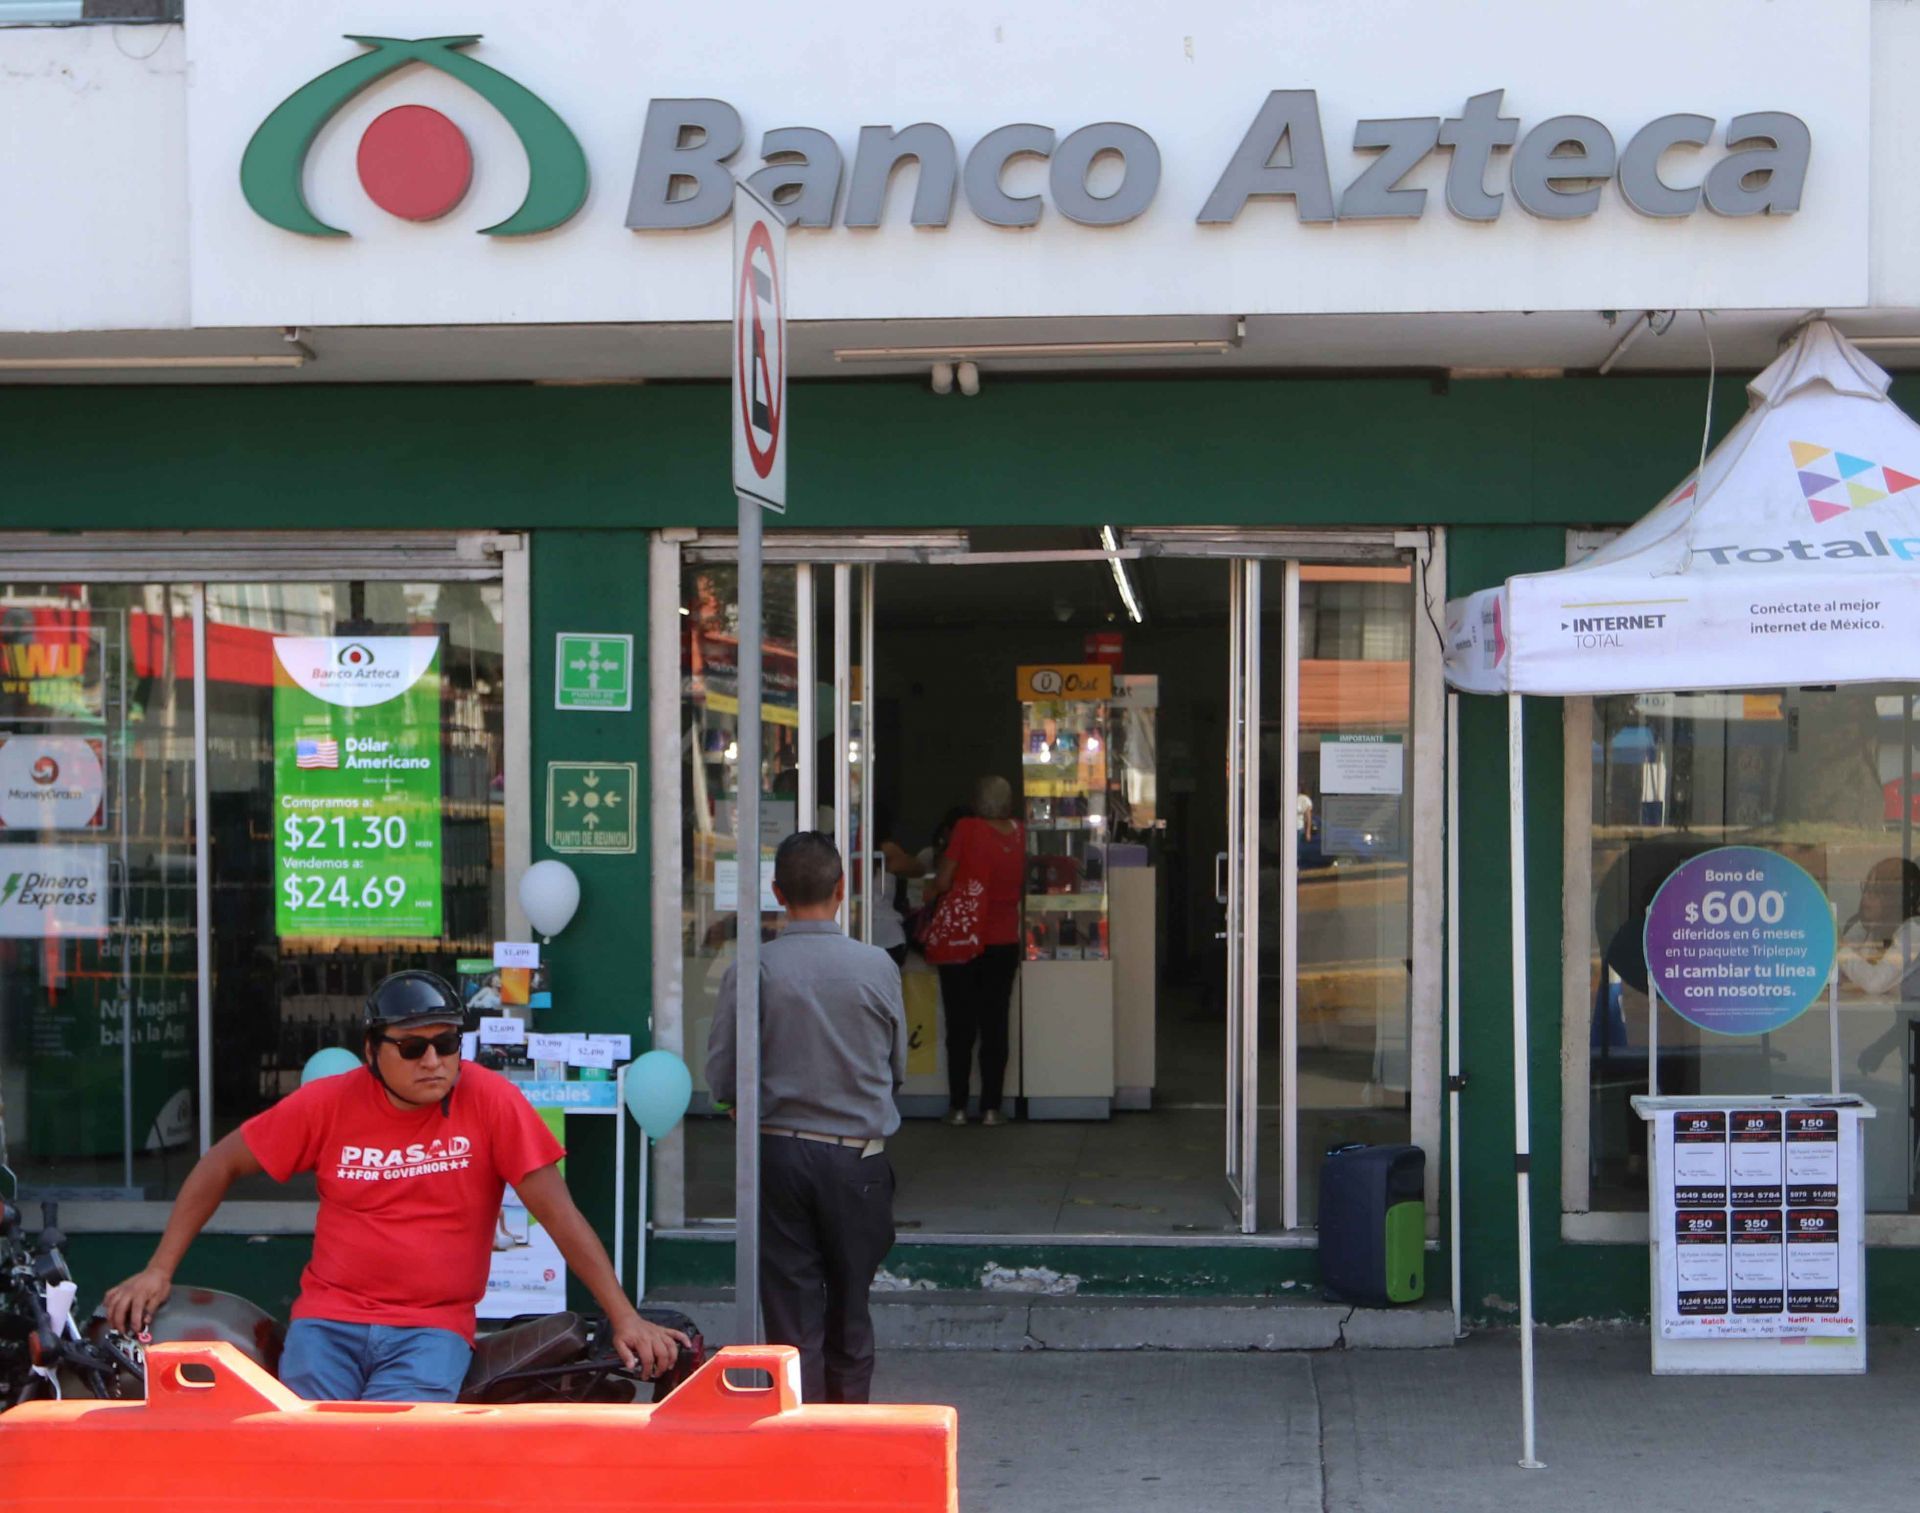 Banco Azteca will be the only banking unit that will have a schedule from 9:00 a.m. to 9:00 p.m. on holidays.  (PHOTO: GRACIELA LÓPEZ / CUARTOSCURO.COM).